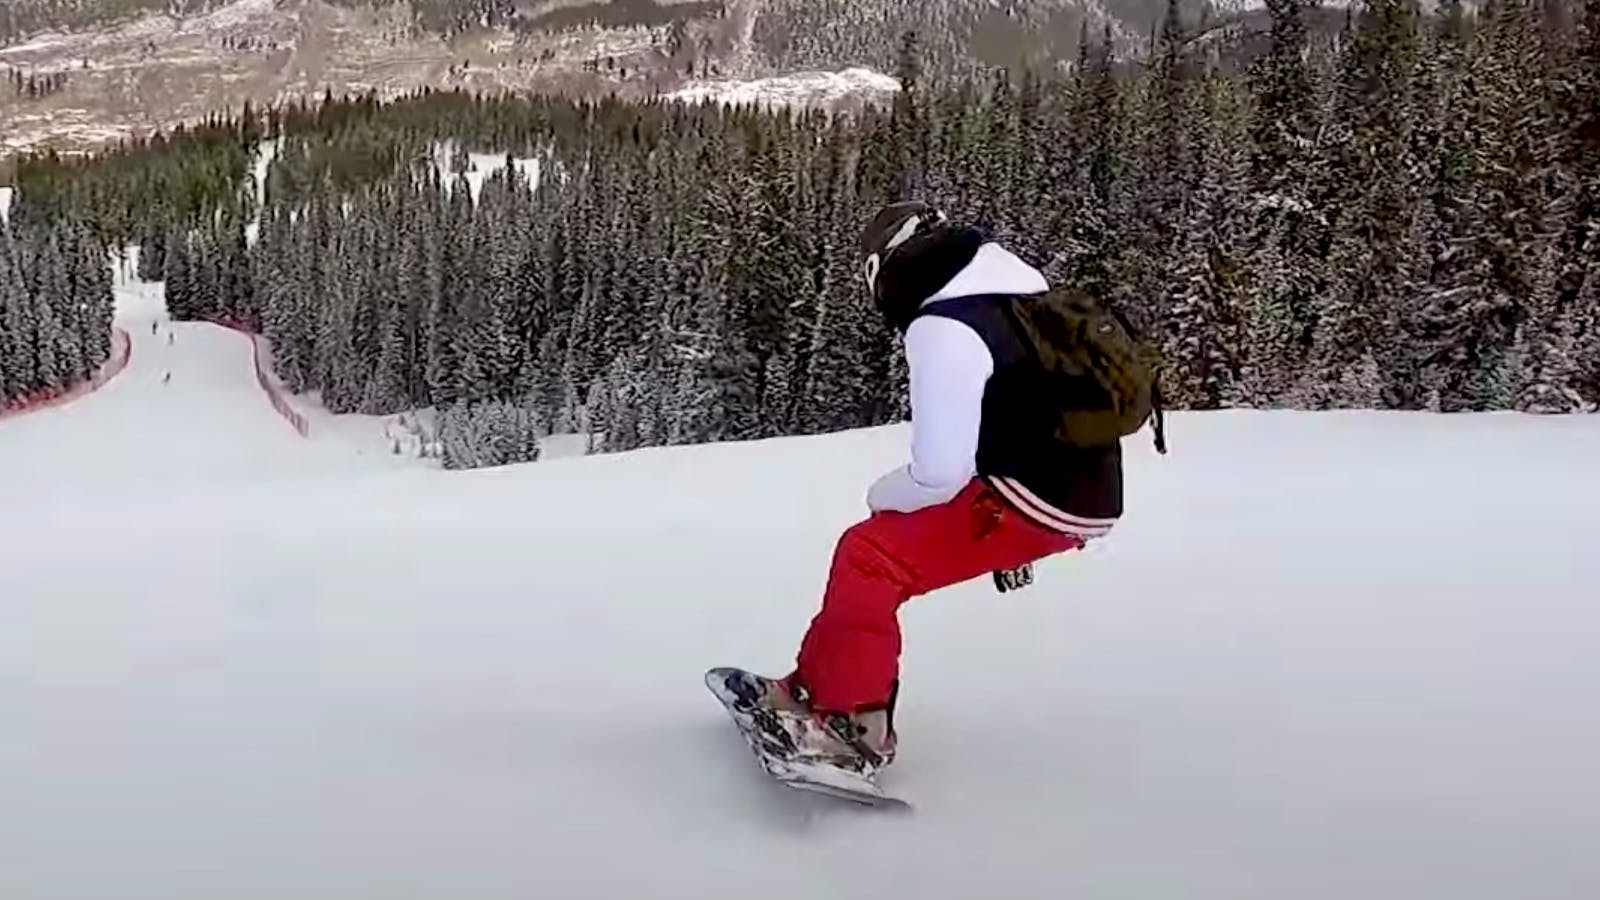 A screenshot from the YouTube video shows Frankie V. heading downhill on the board while wearing red pants. 